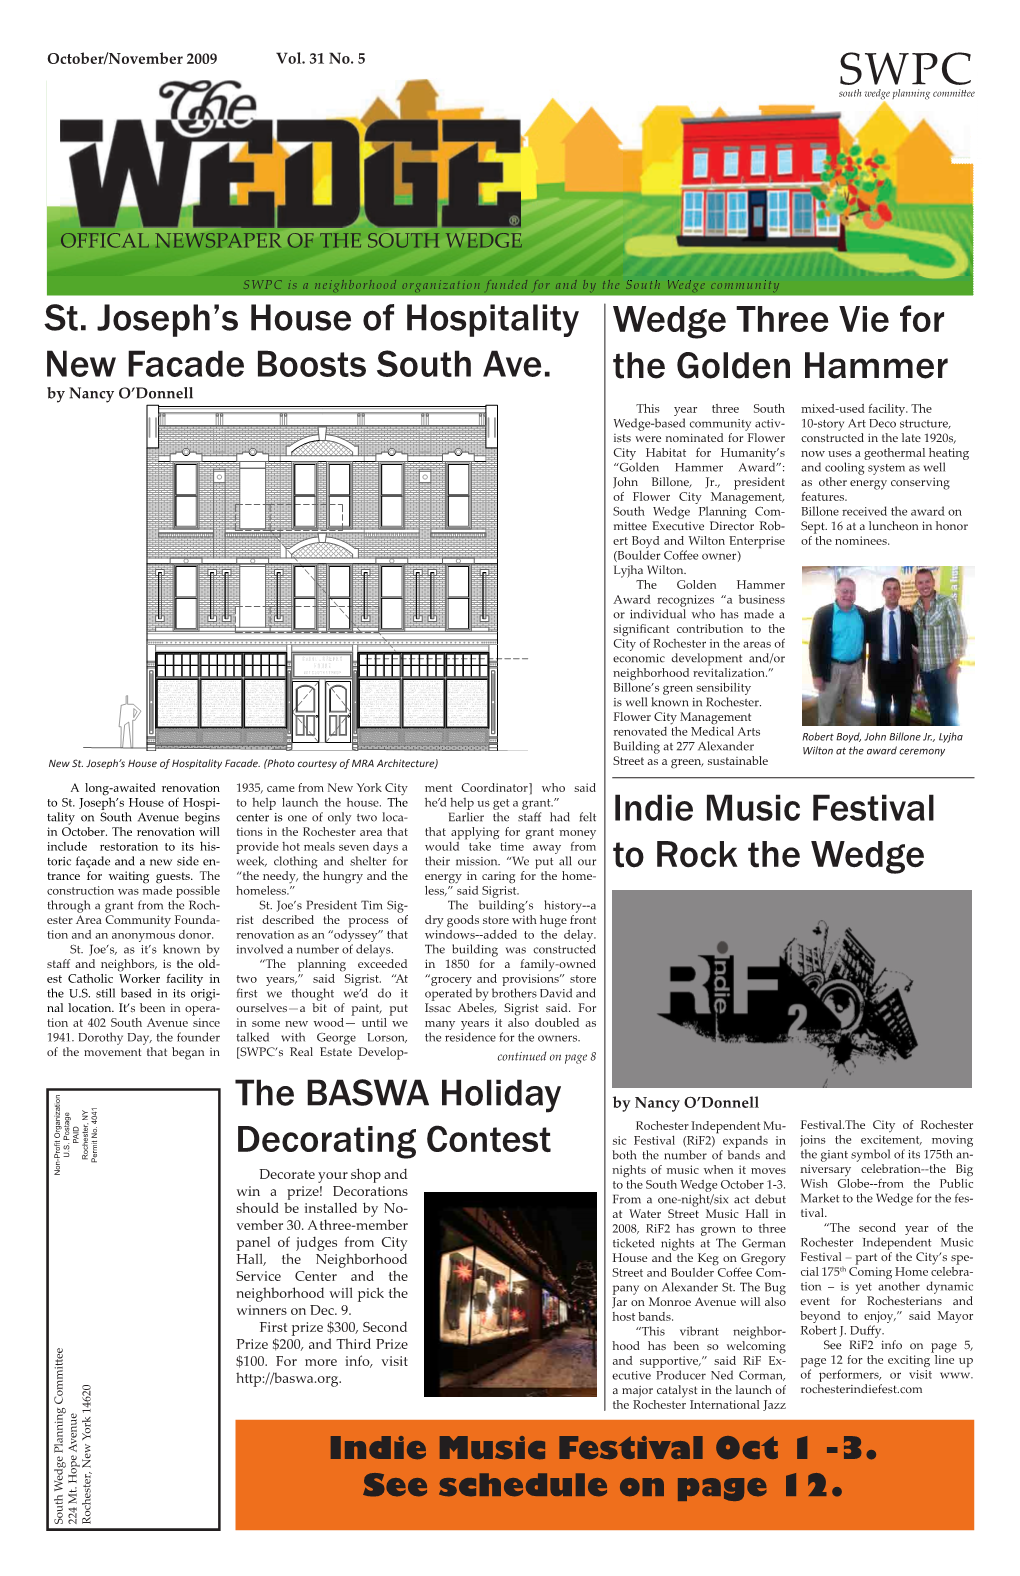 St. Joseph's House of Hospitality New Facade Boosts South Ave. Indie Music Festival to Rock the Wedge Wedge Three Vie For